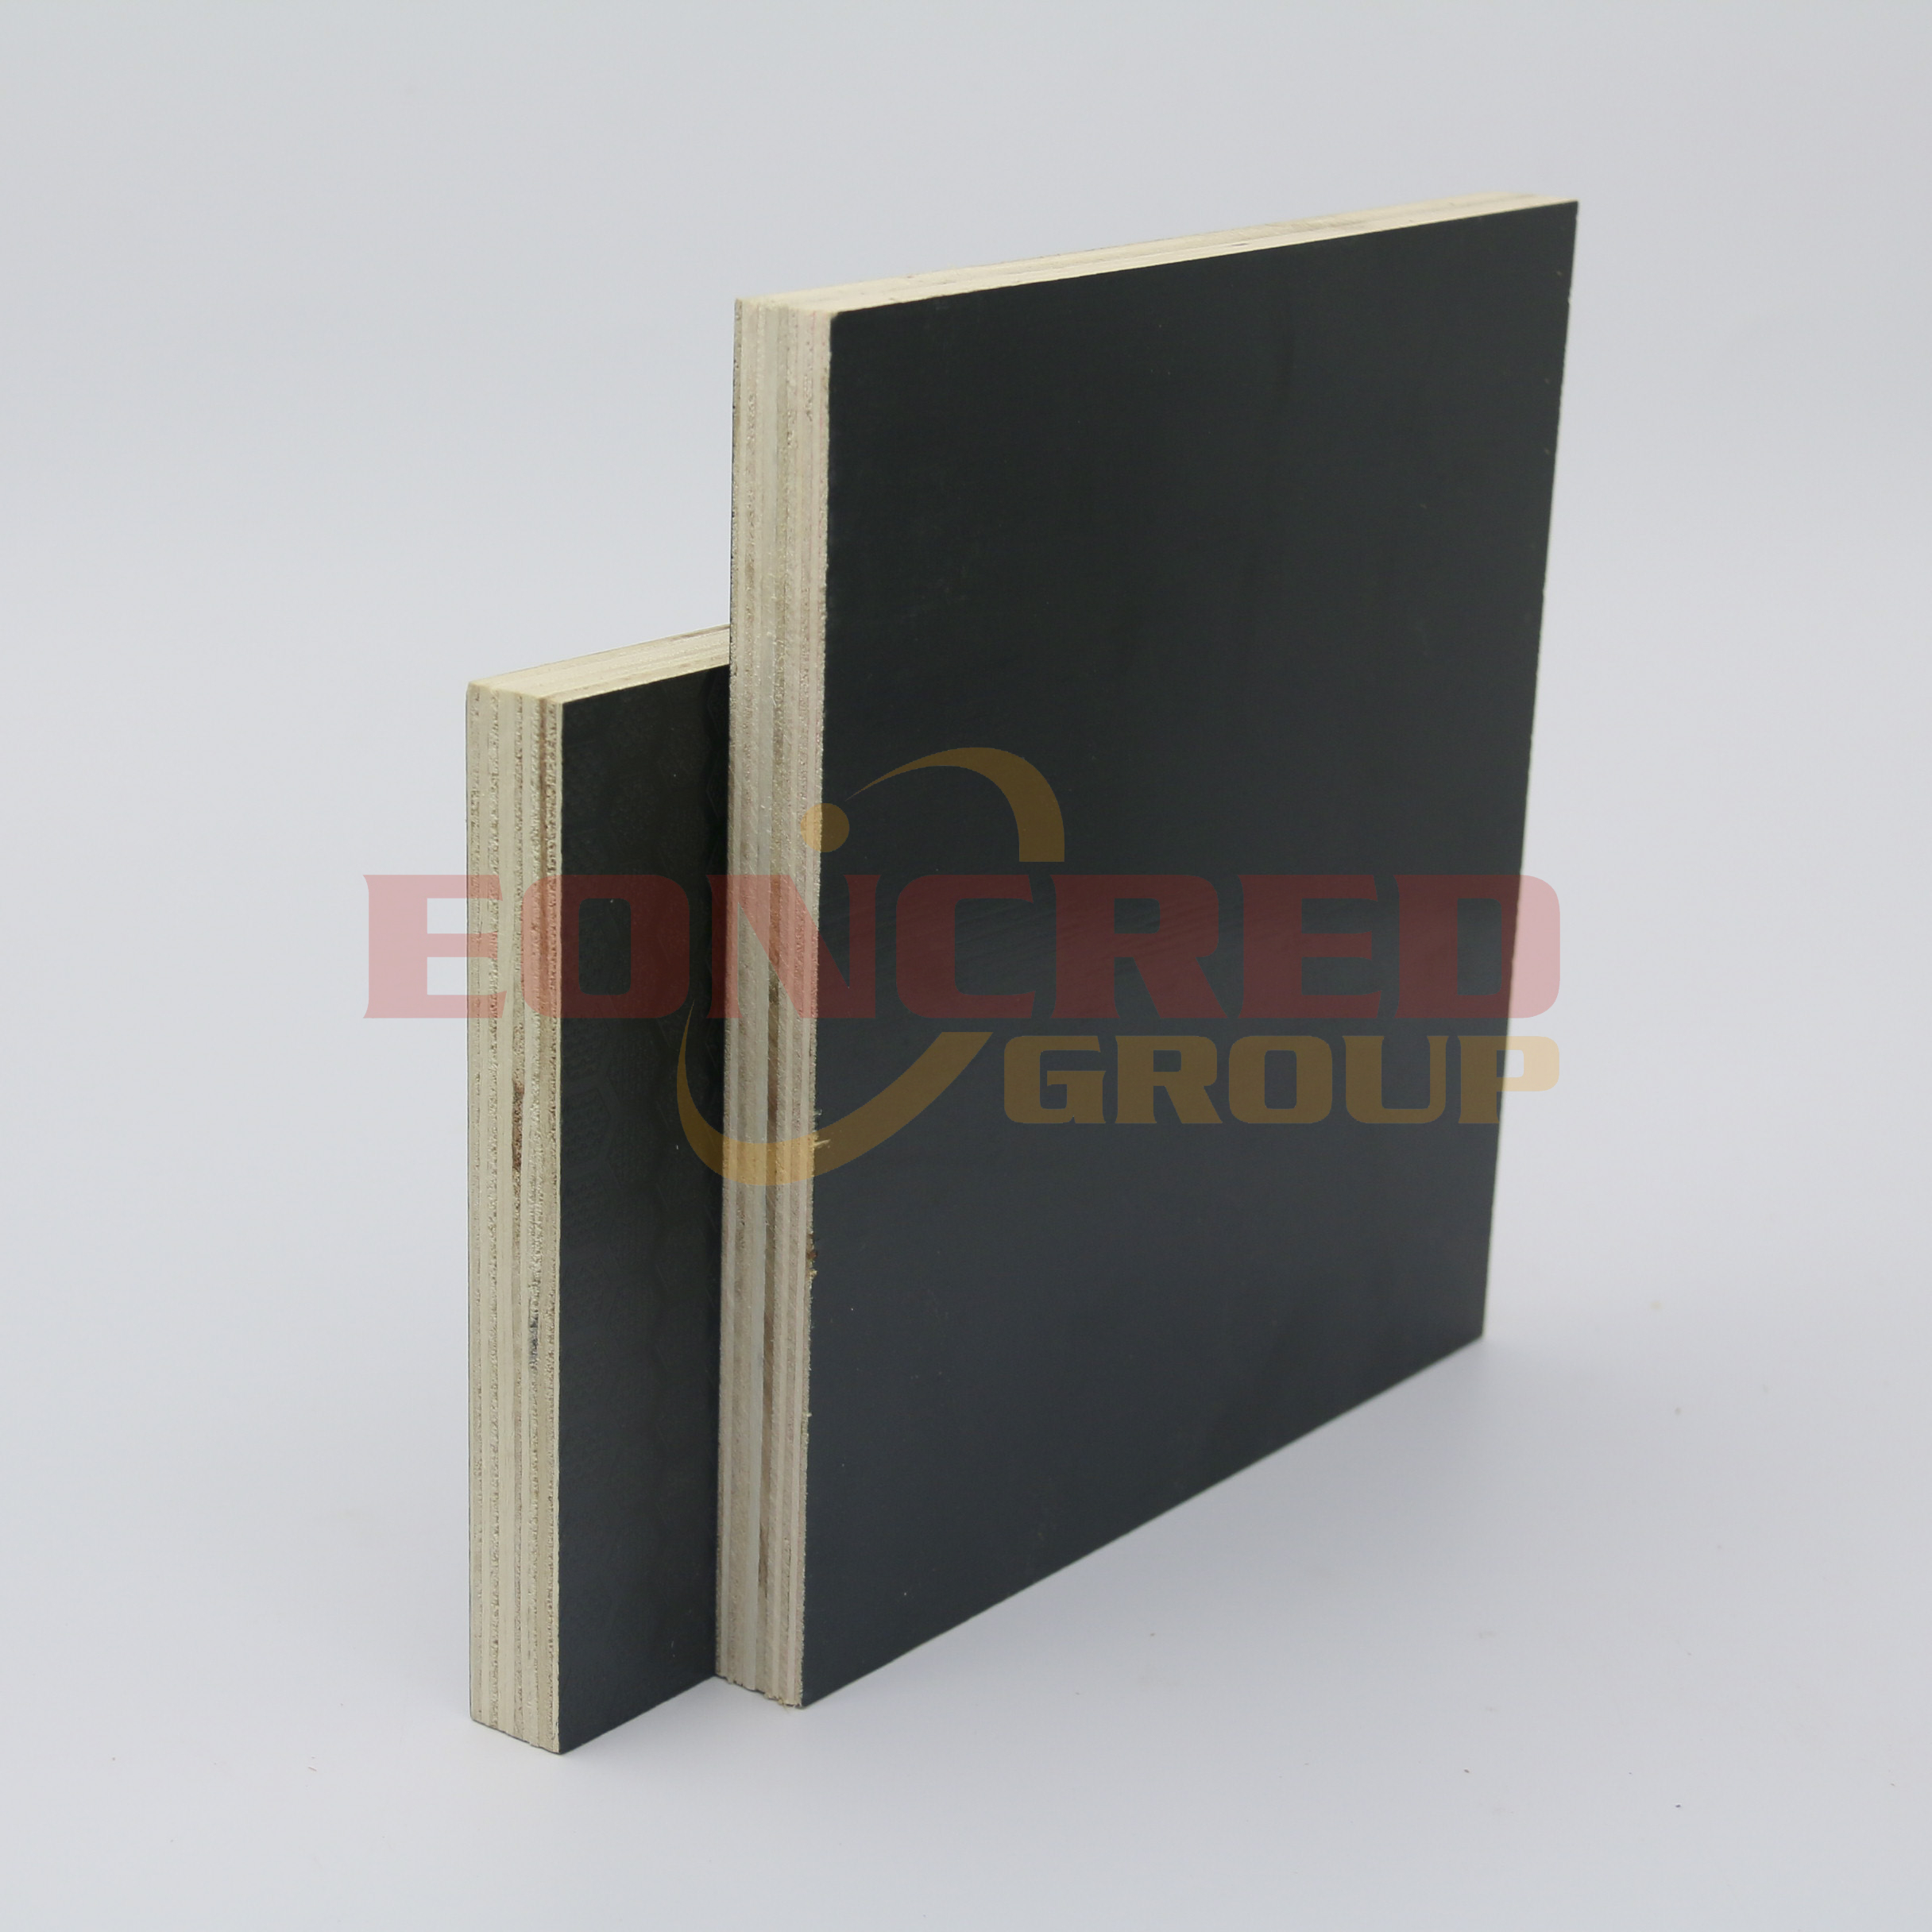  Film Face Plywood in Metal Frames for Hot Sale